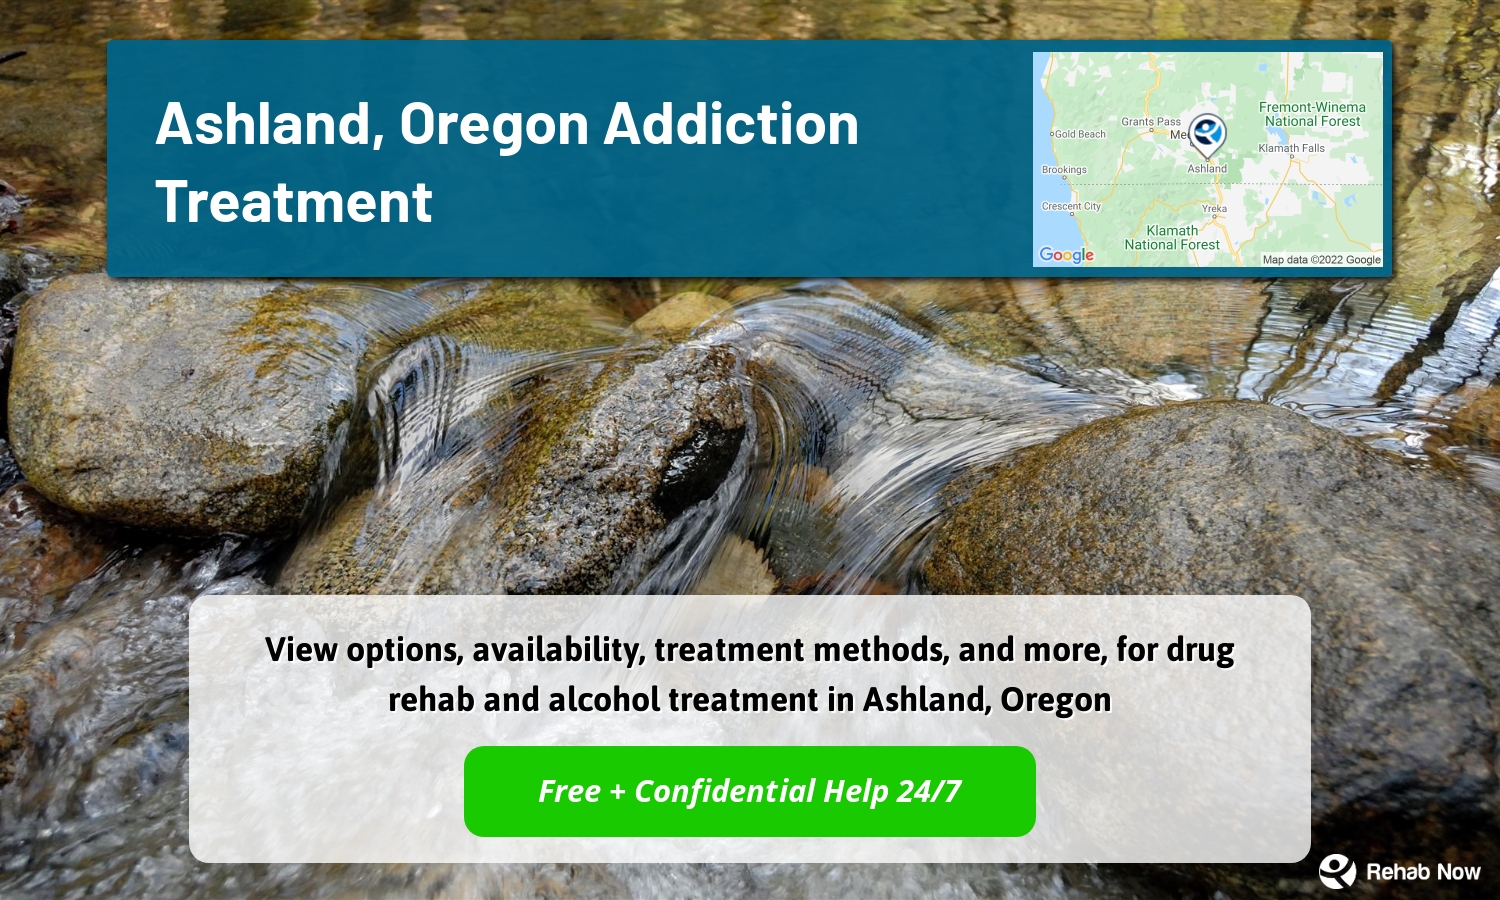 View options, availability, treatment methods, and more, for drug rehab and alcohol treatment in Ashland, Oregon